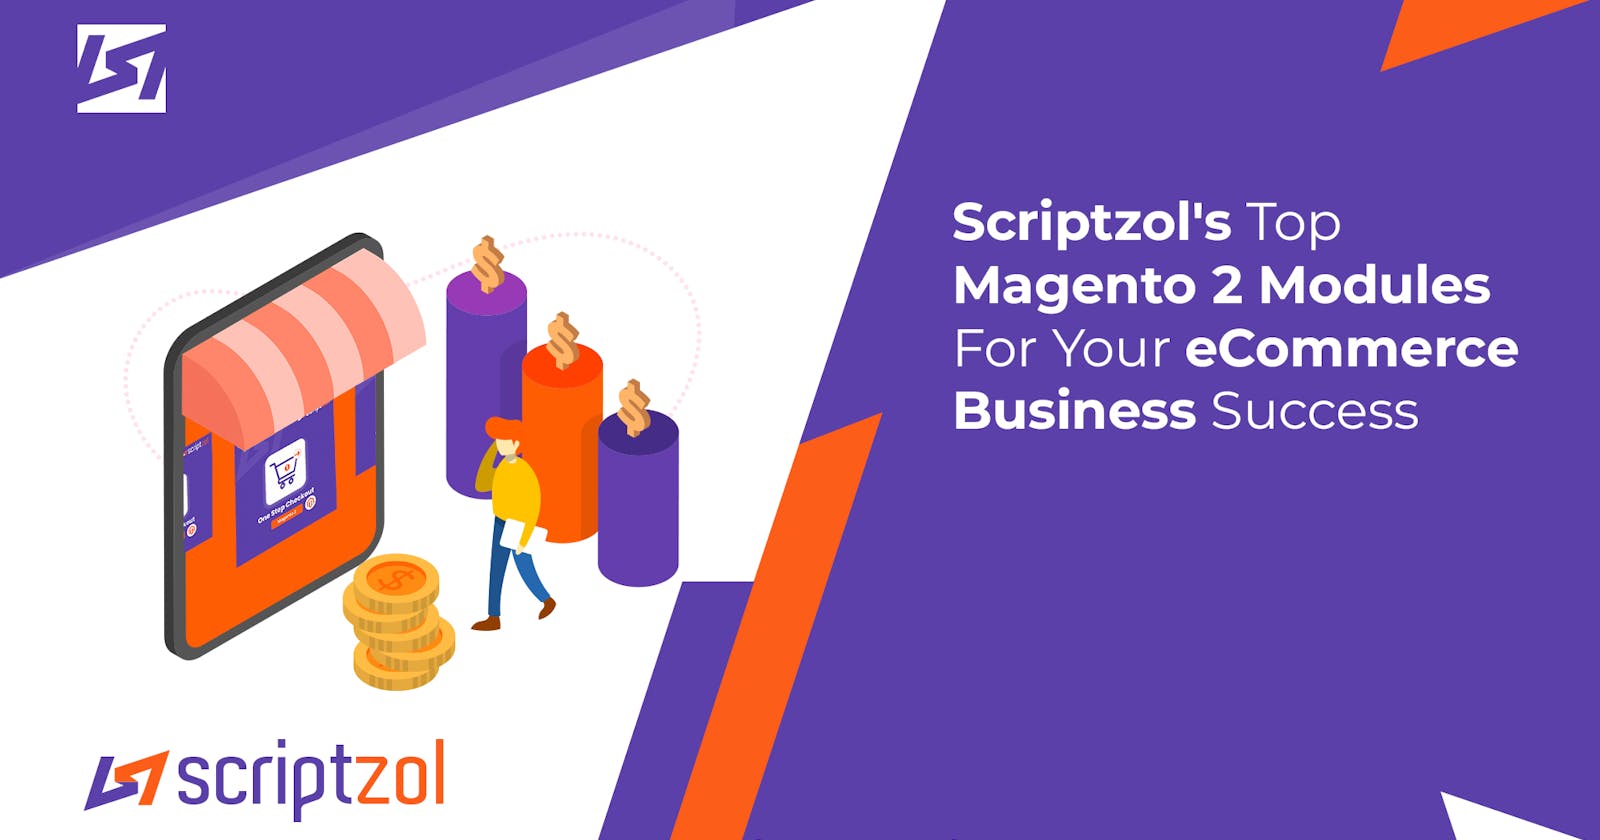 Scriptzol's Top Magento 2 Modules For Your eCommerce Business Success